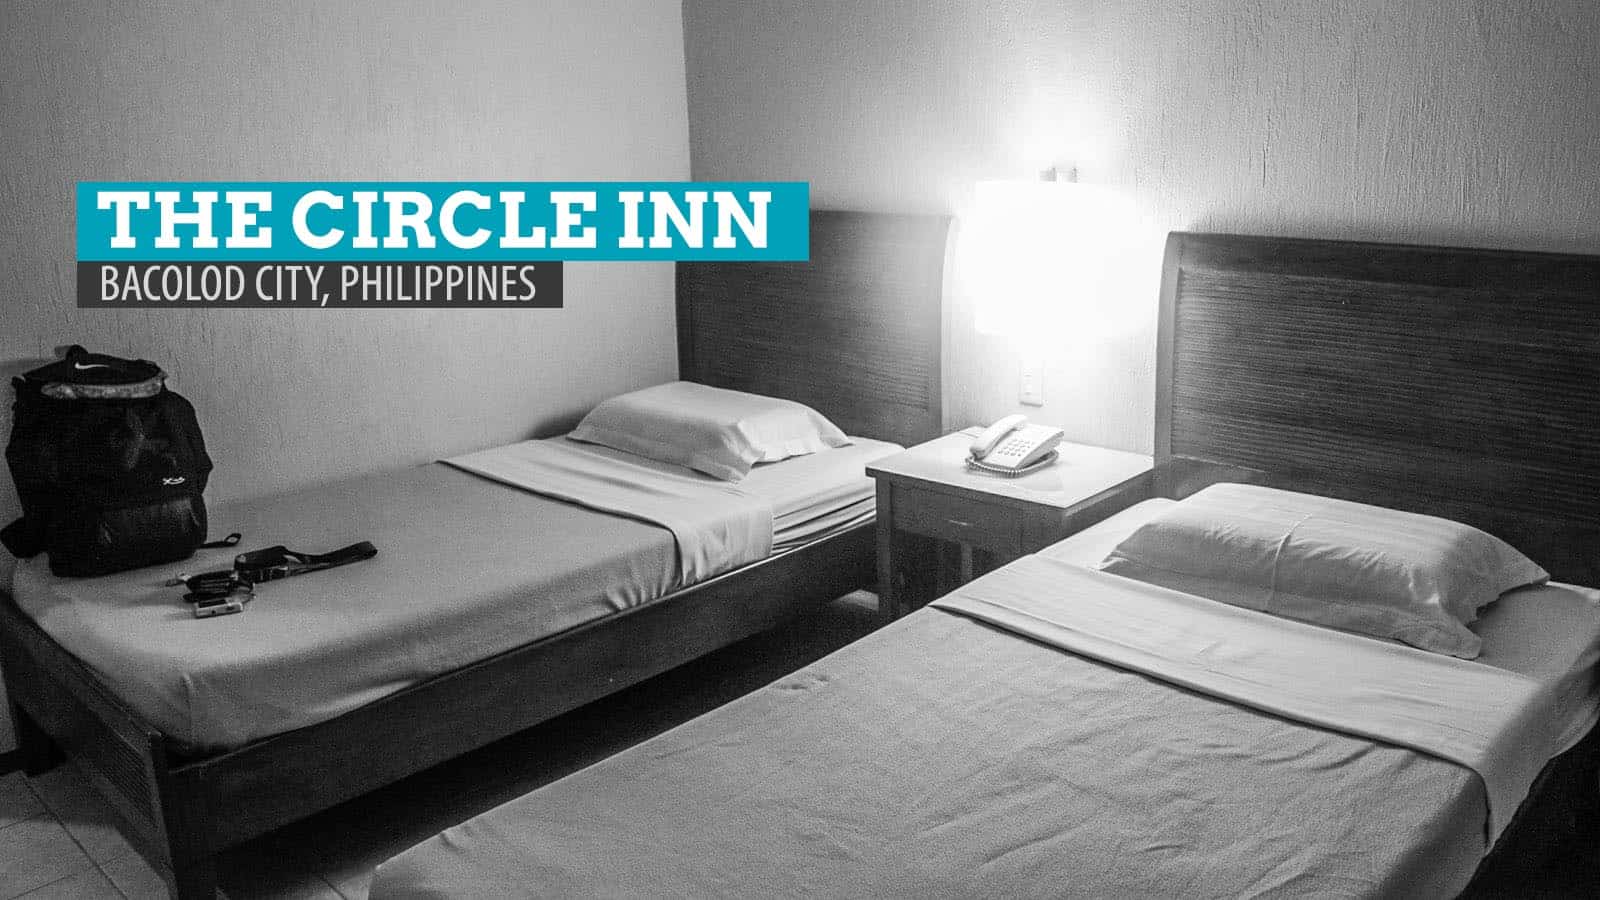 The Circle Inn: Where to Stay in Bacolod City, Philippines